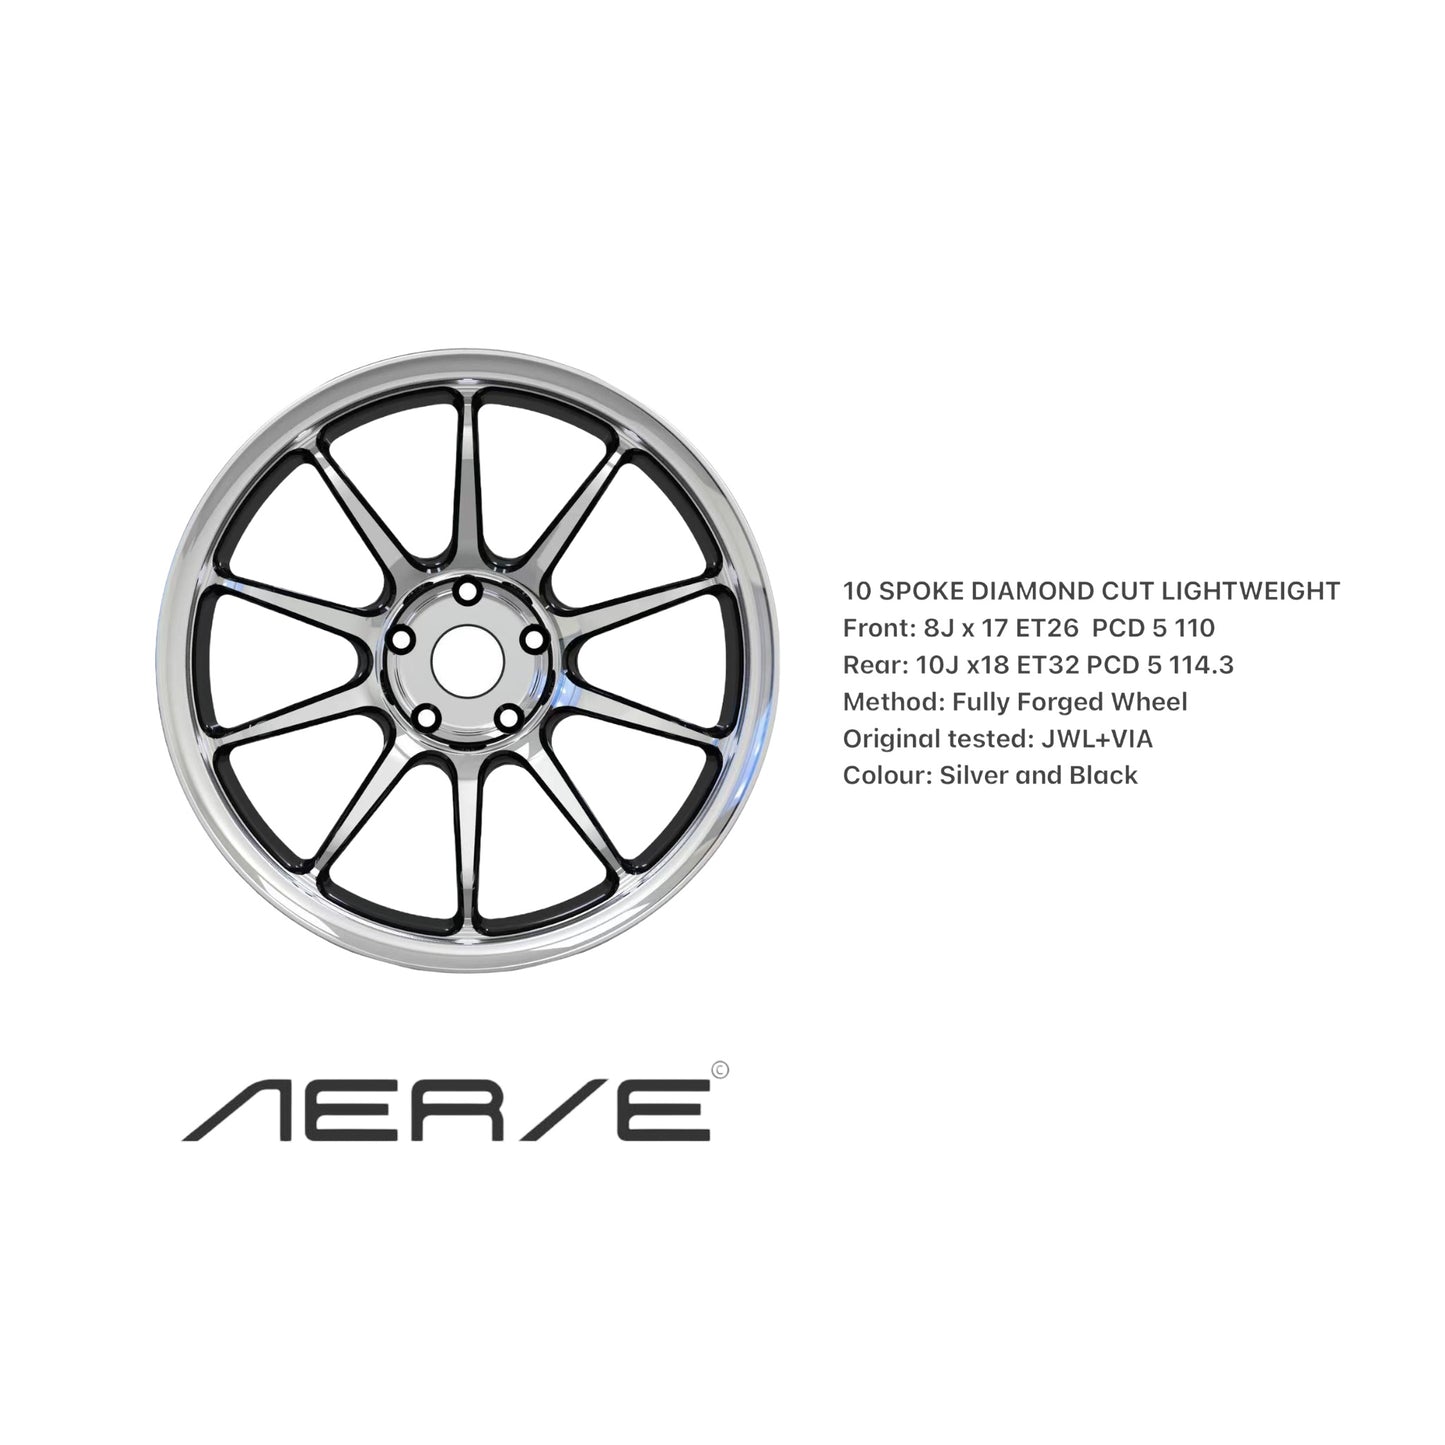 Exige Cup 430 forged alloy wheels finial edition diamond